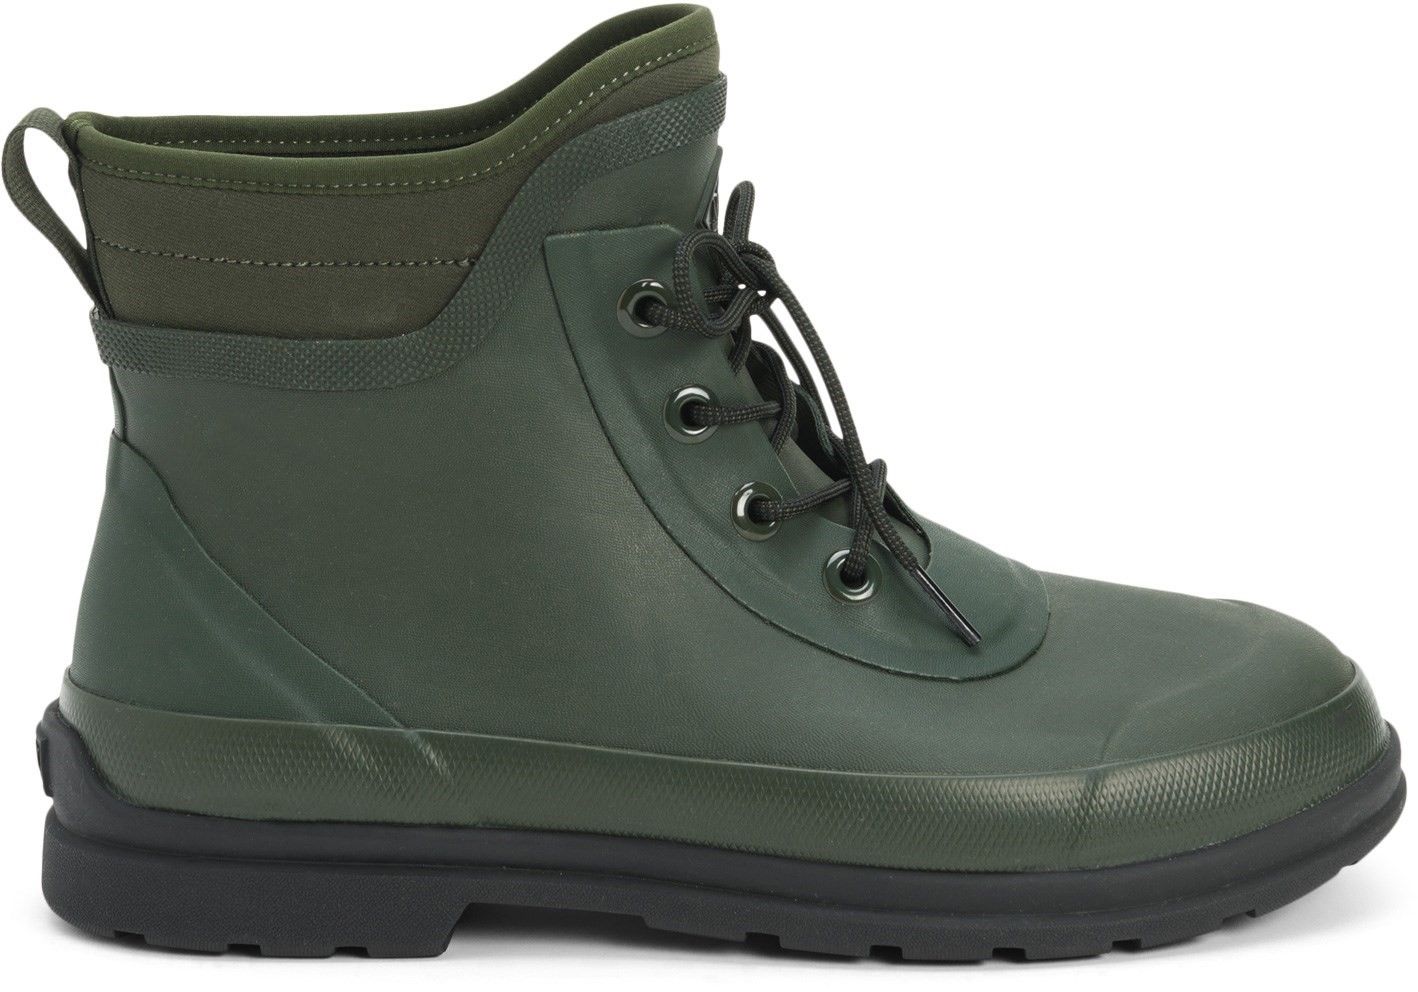 Inspired by our beloved Chore Boot, Muck Originals is a collection of light-duty essential footwear for men and women. Fully lined boots are wrapped in soft, hand-laid rubber for comfortable, 100% waterproof protection.100% Waterproof. 
Fully lined with neoprene for flexibility. 
Exposed collar for added comfort. 
Moulded PU footbed with memory foam for underfoot comfort. 
Nzyme antimicrobial treatment for odour control.